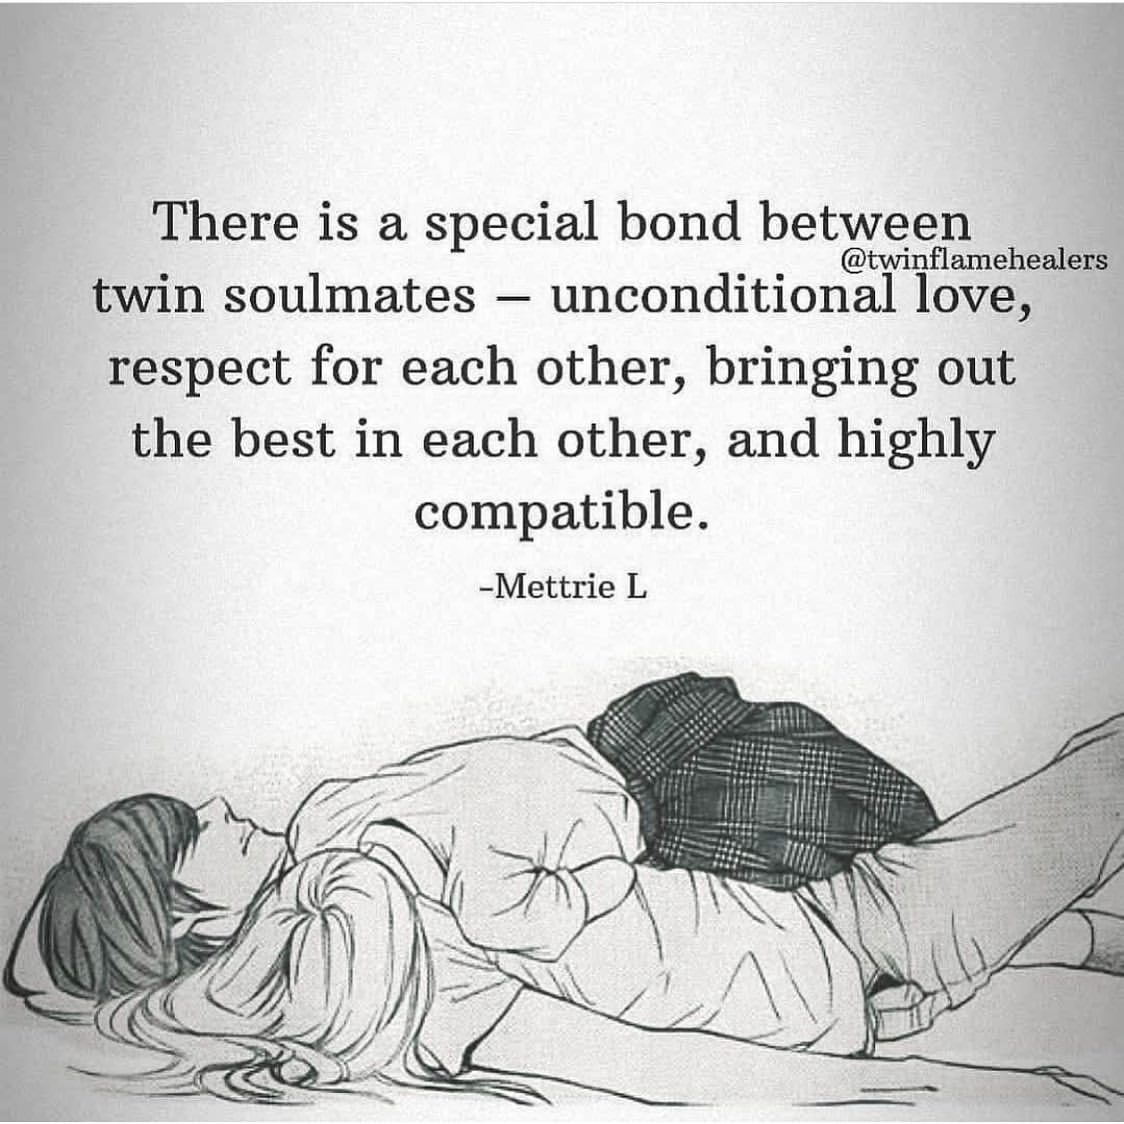 There is a special bond between twin soulmates, unconditional love, respect for each other, bringing out the best in each other, and highly compatible.